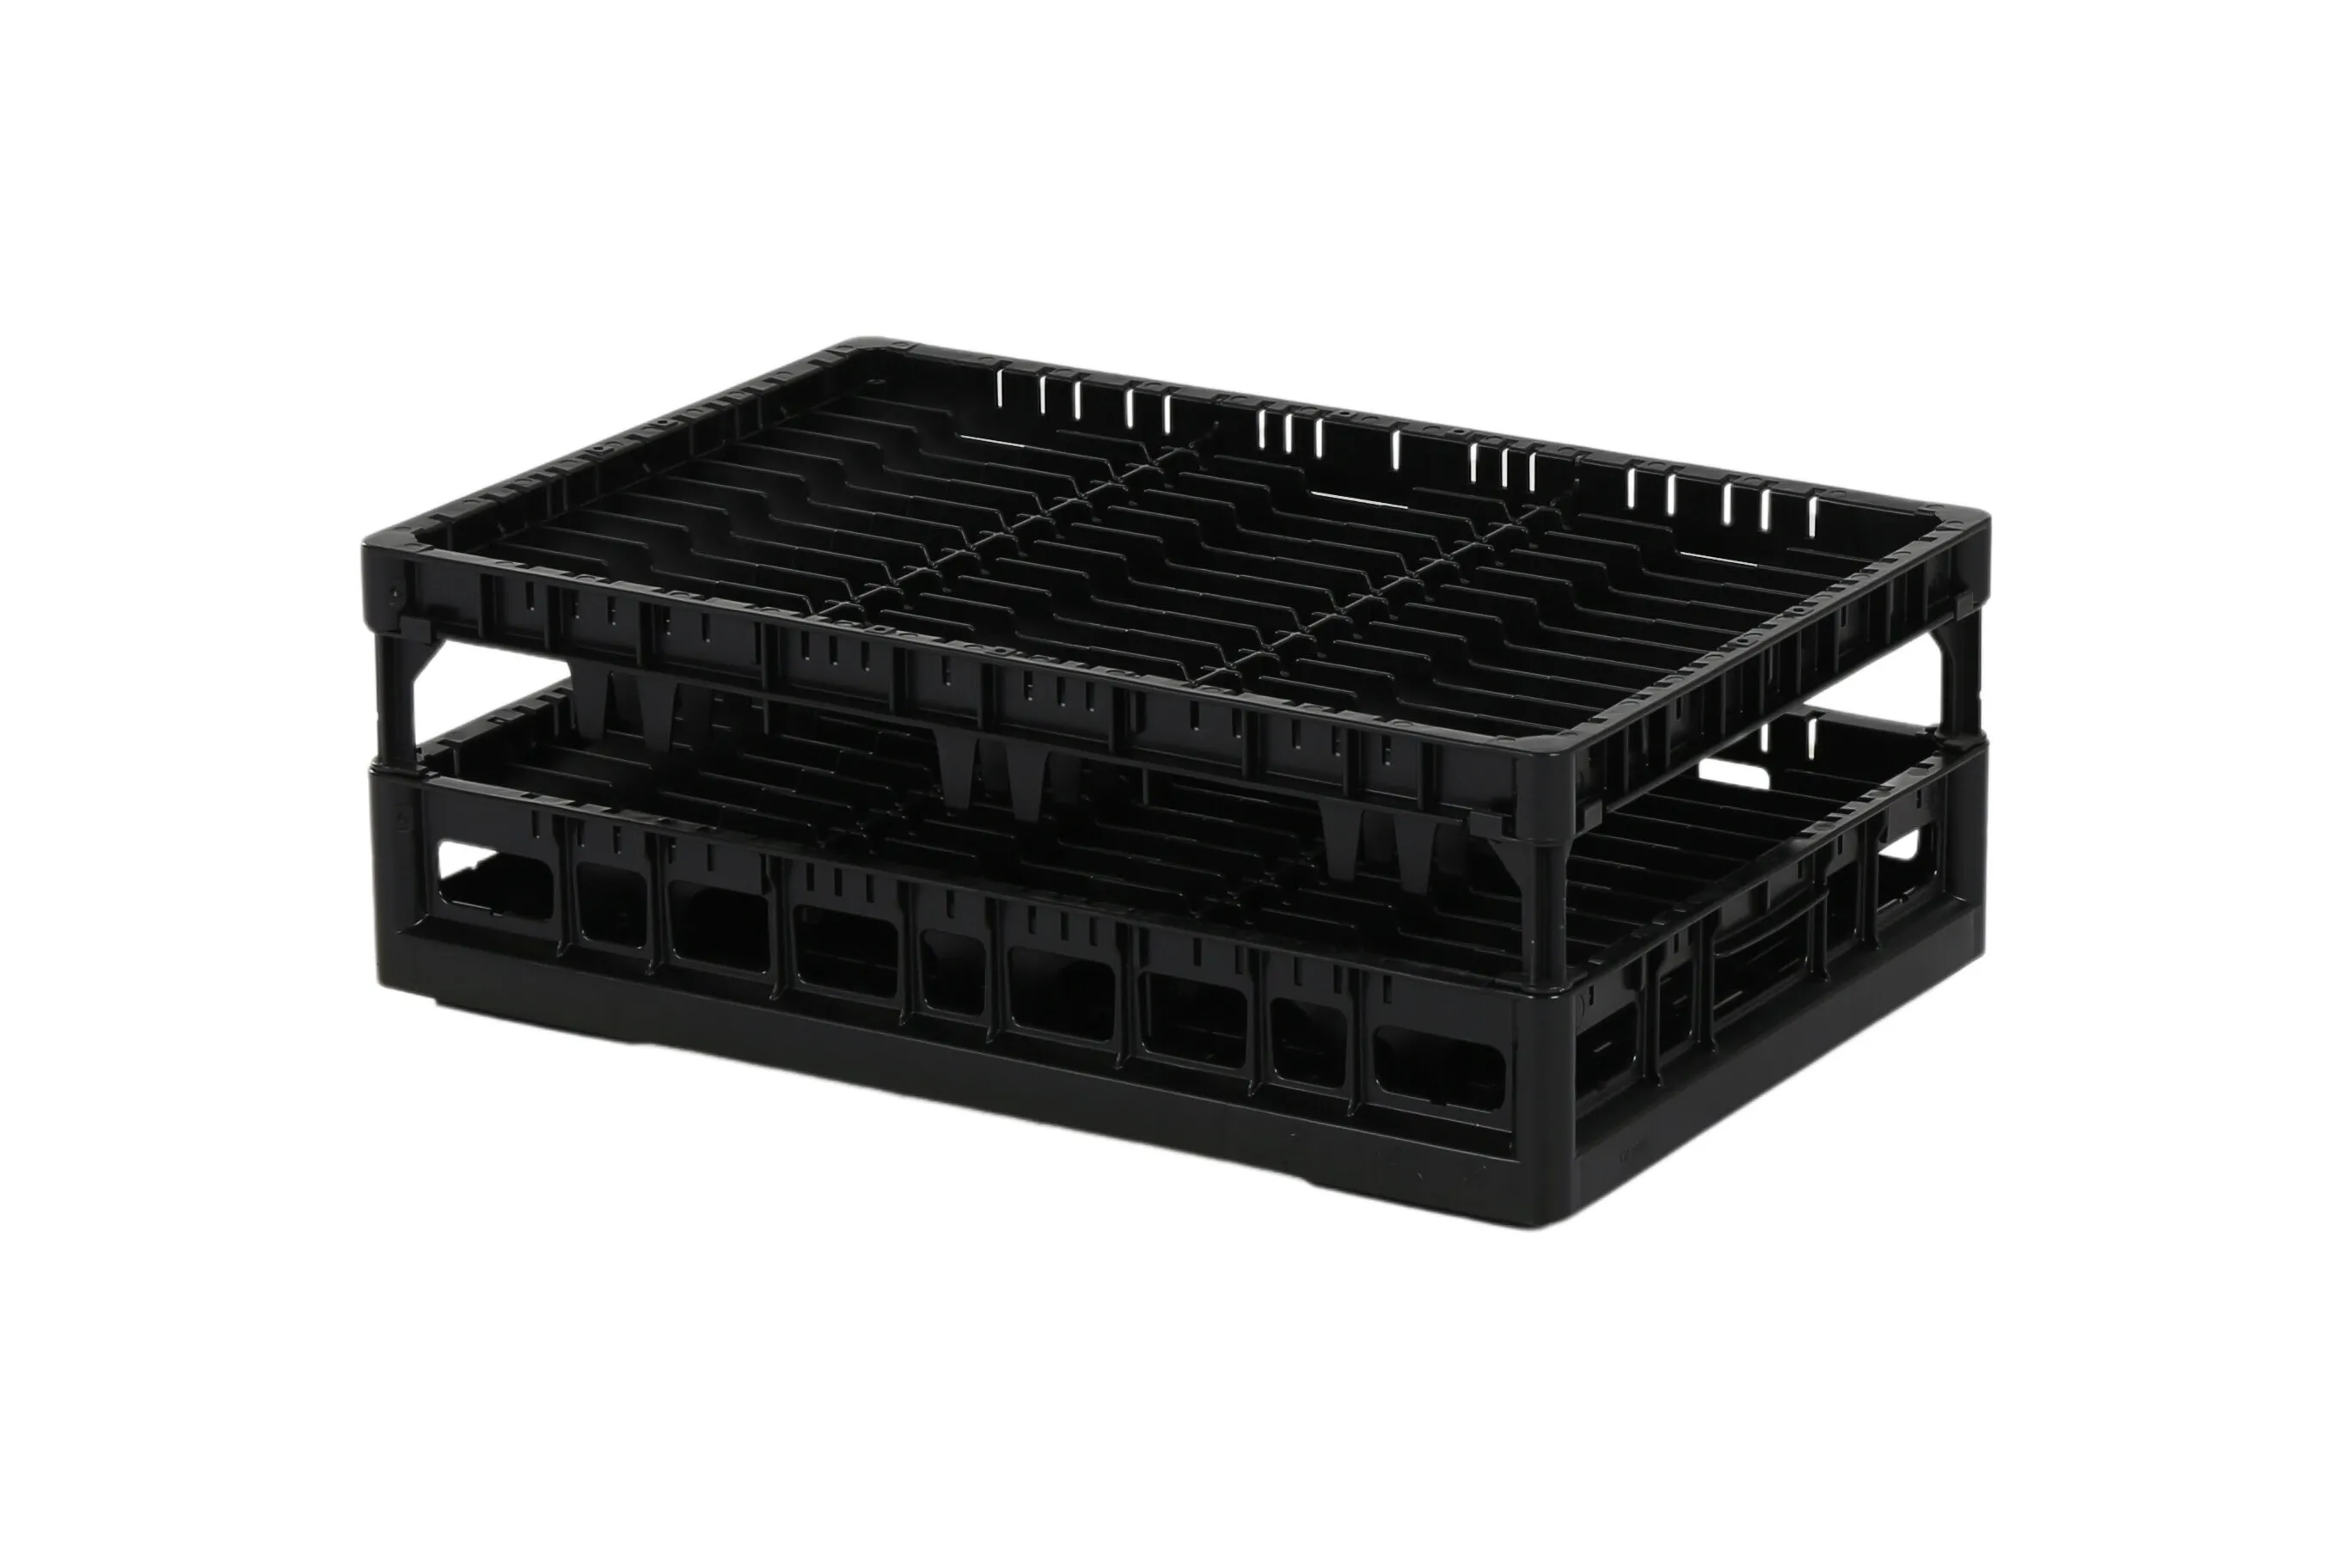 Clixrack Plate basket 600 x 400 mm black - Plate height max. 28mm - with 3 x 12 compartment division - maximum Ø plate 140 mm 